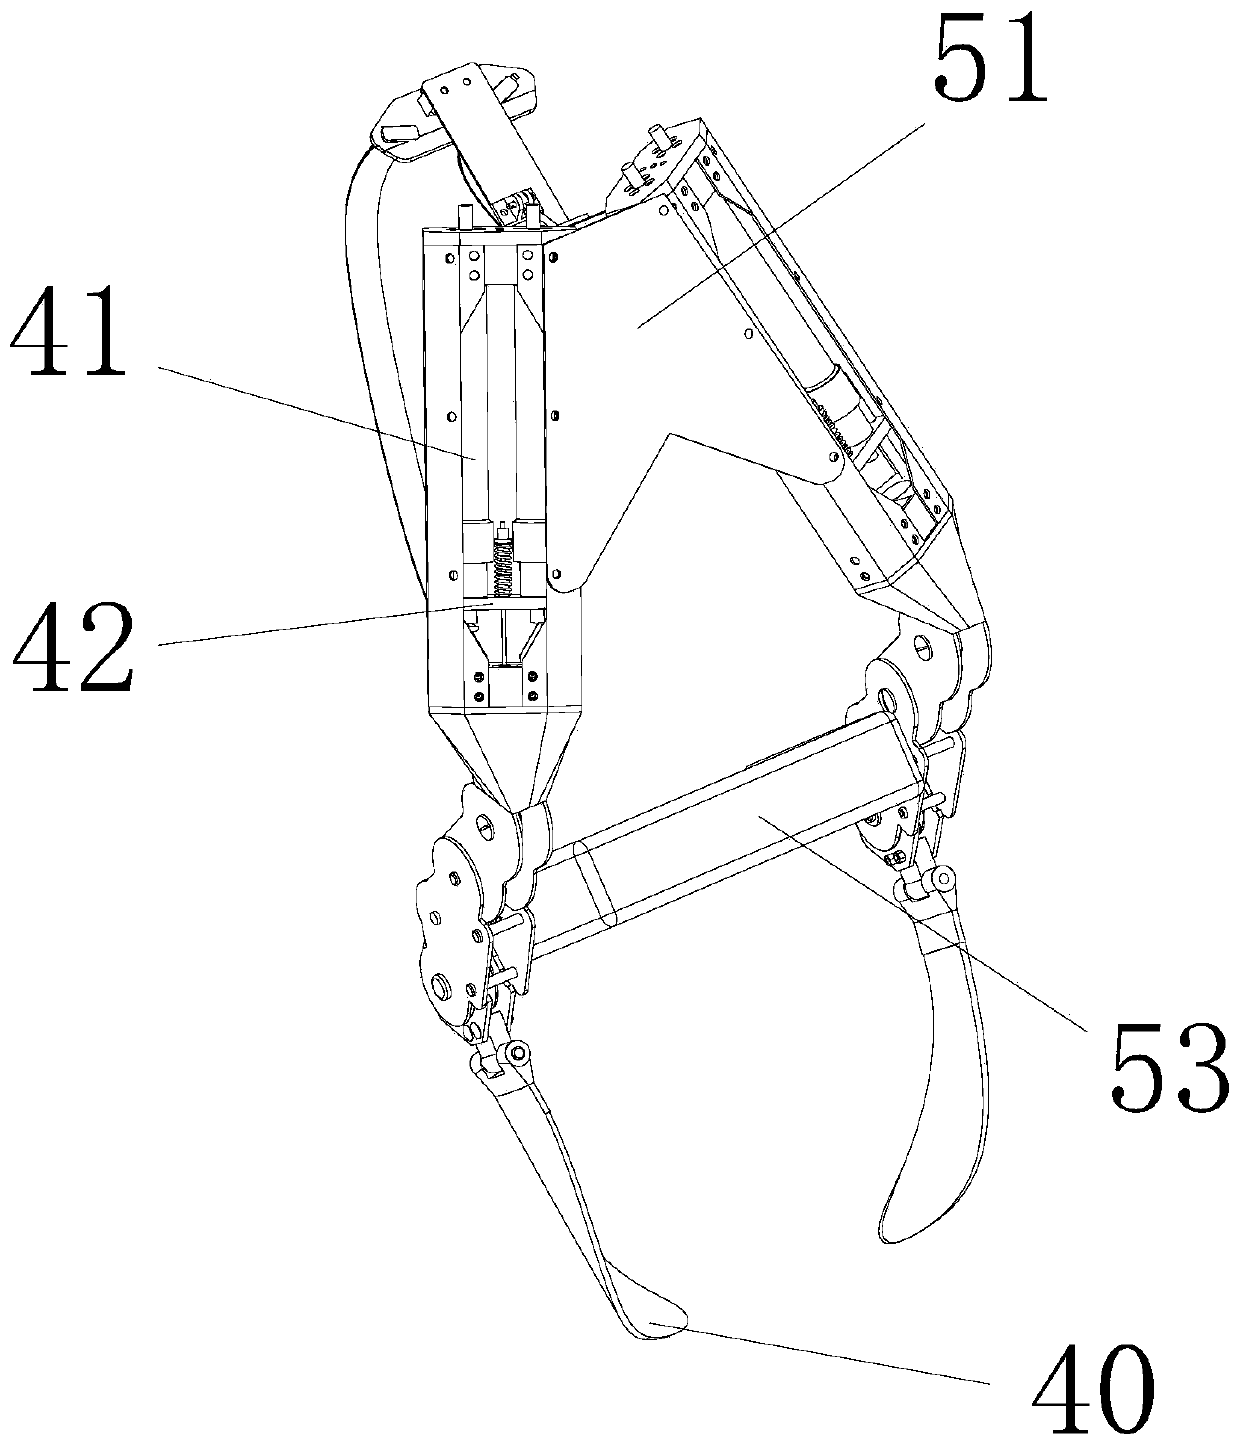 A wearable exoskeleton assisting device